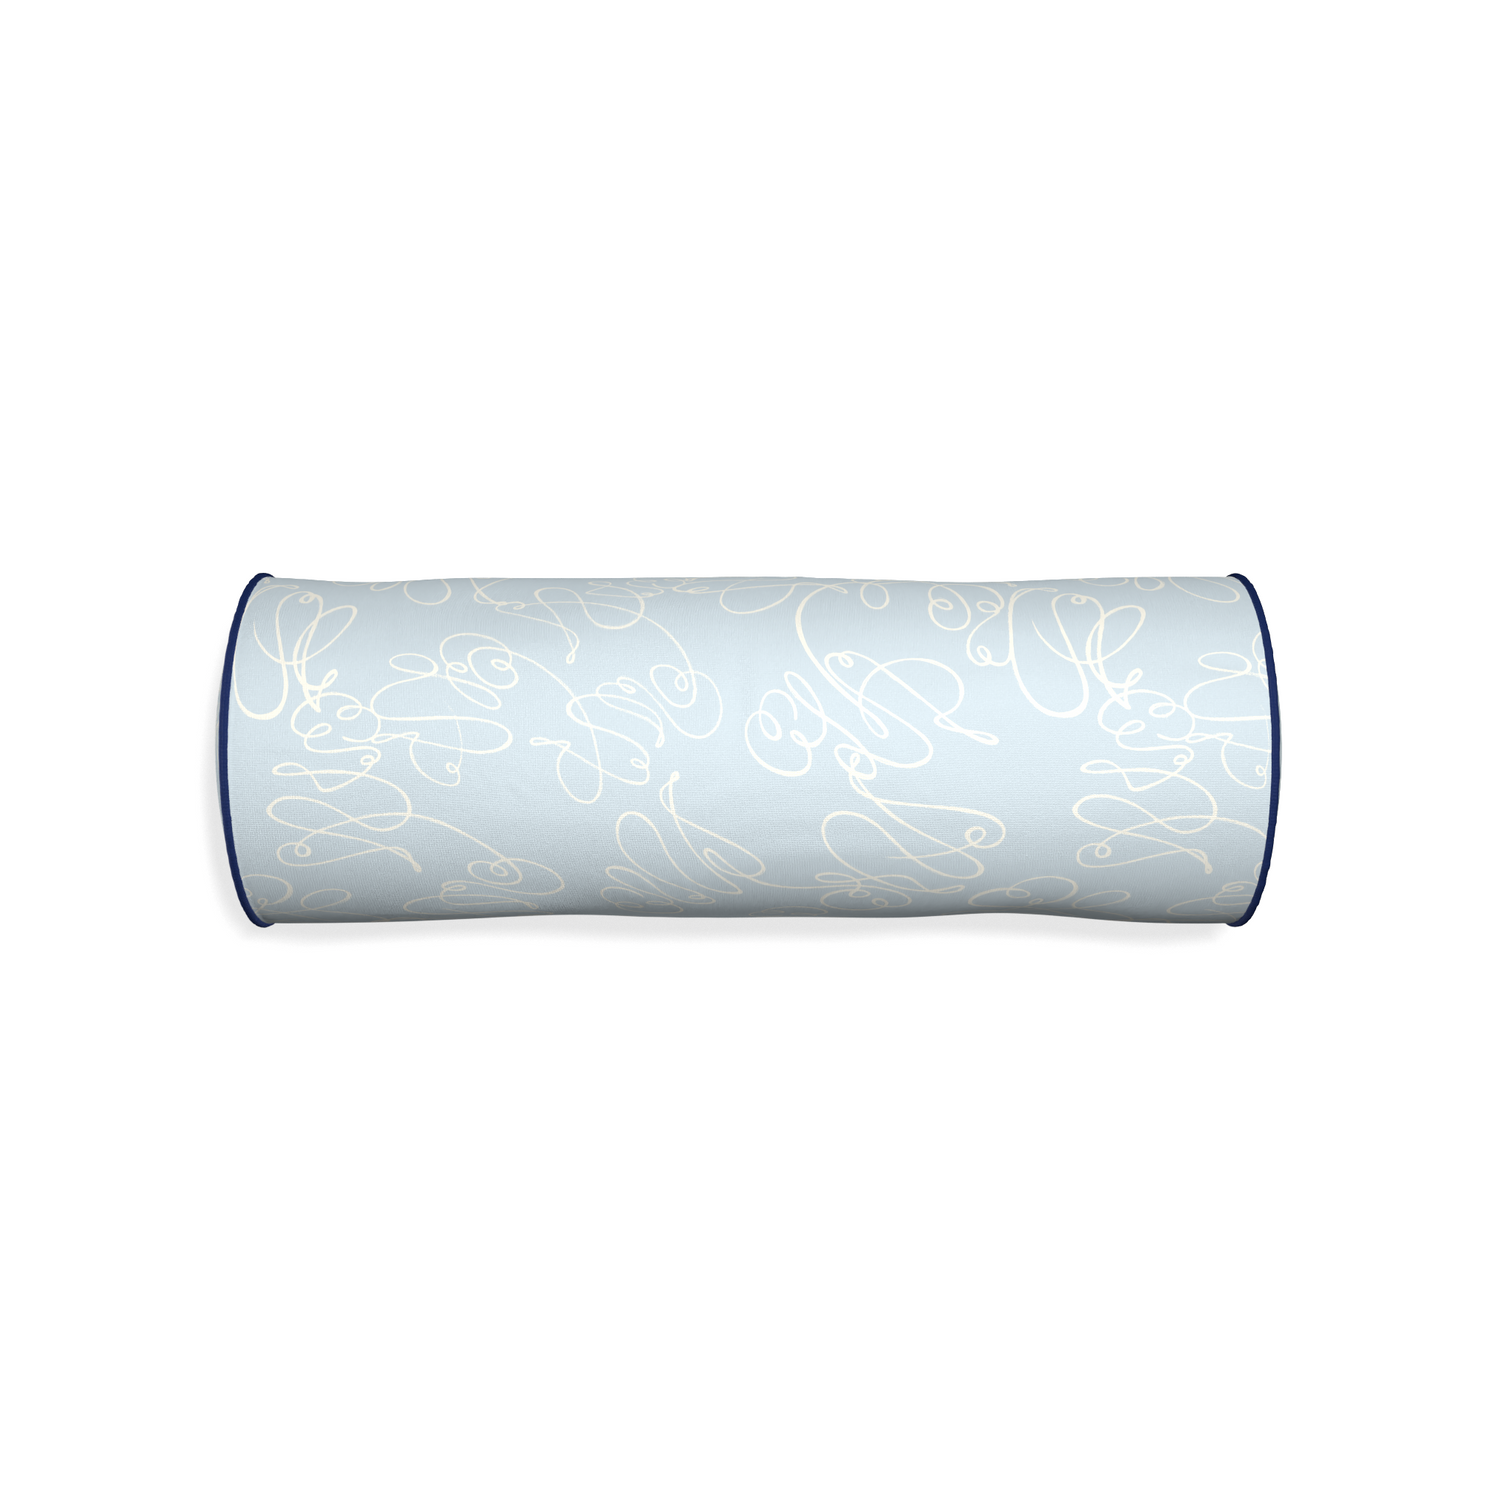 Bolster mirabella custom powder blue abstractpillow with midnight piping on white background